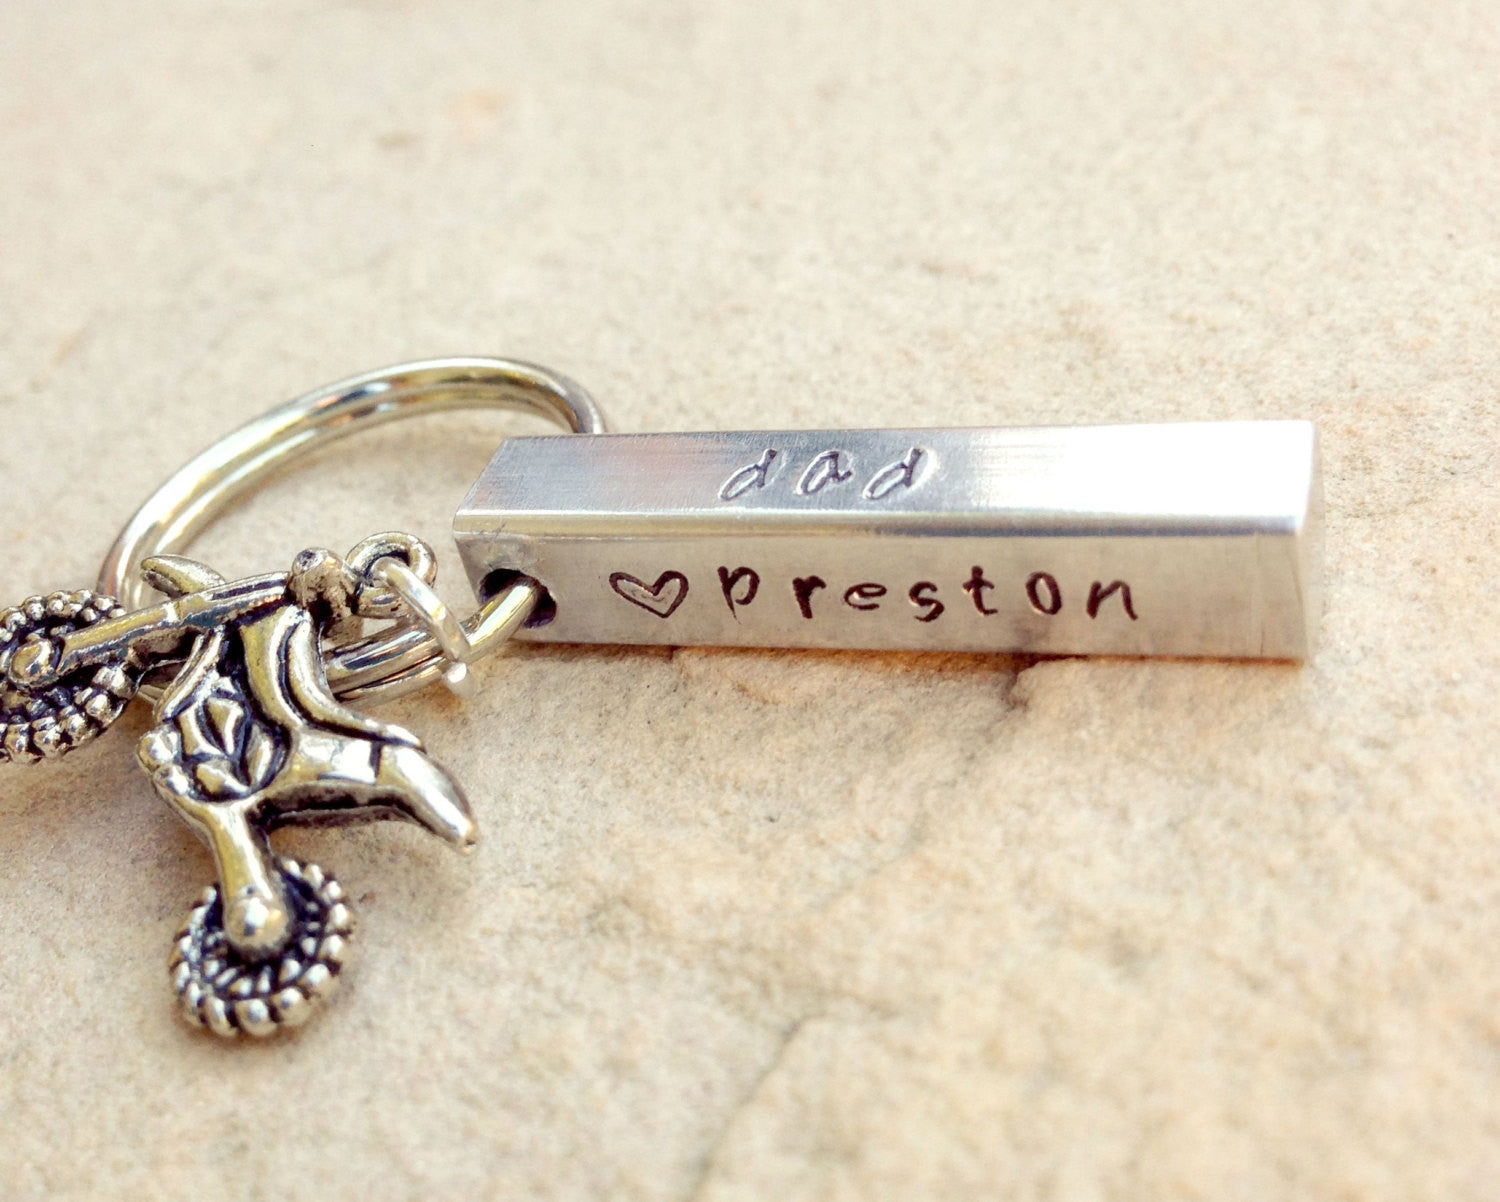 Personalized Keychain | A B Colour Craft